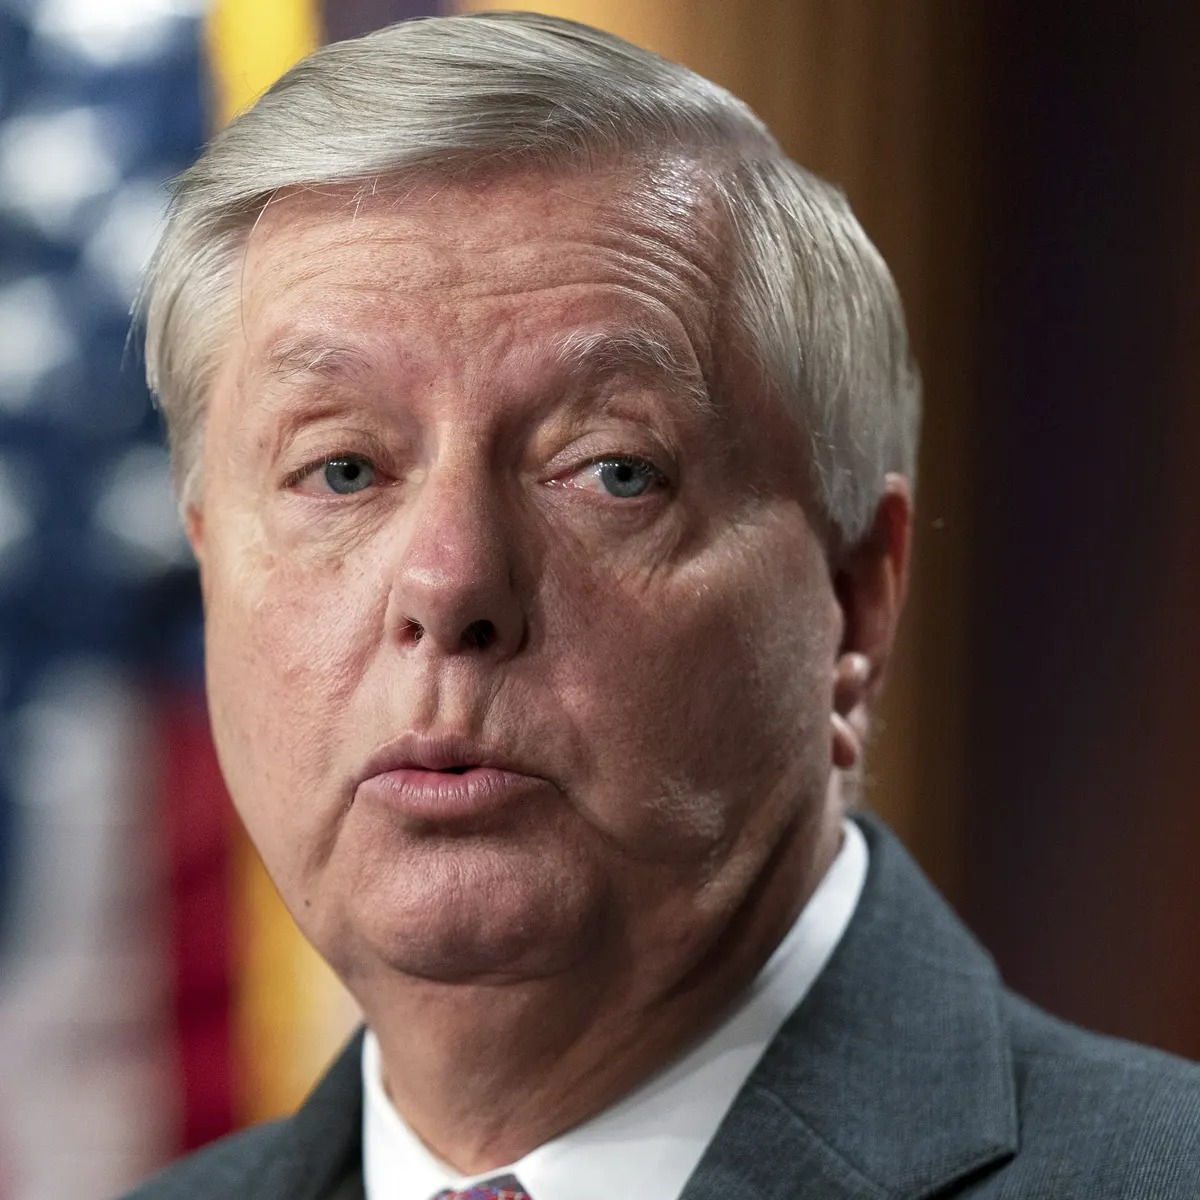 What Did Lindsey Graham Really Say About Trump’s Presidency?